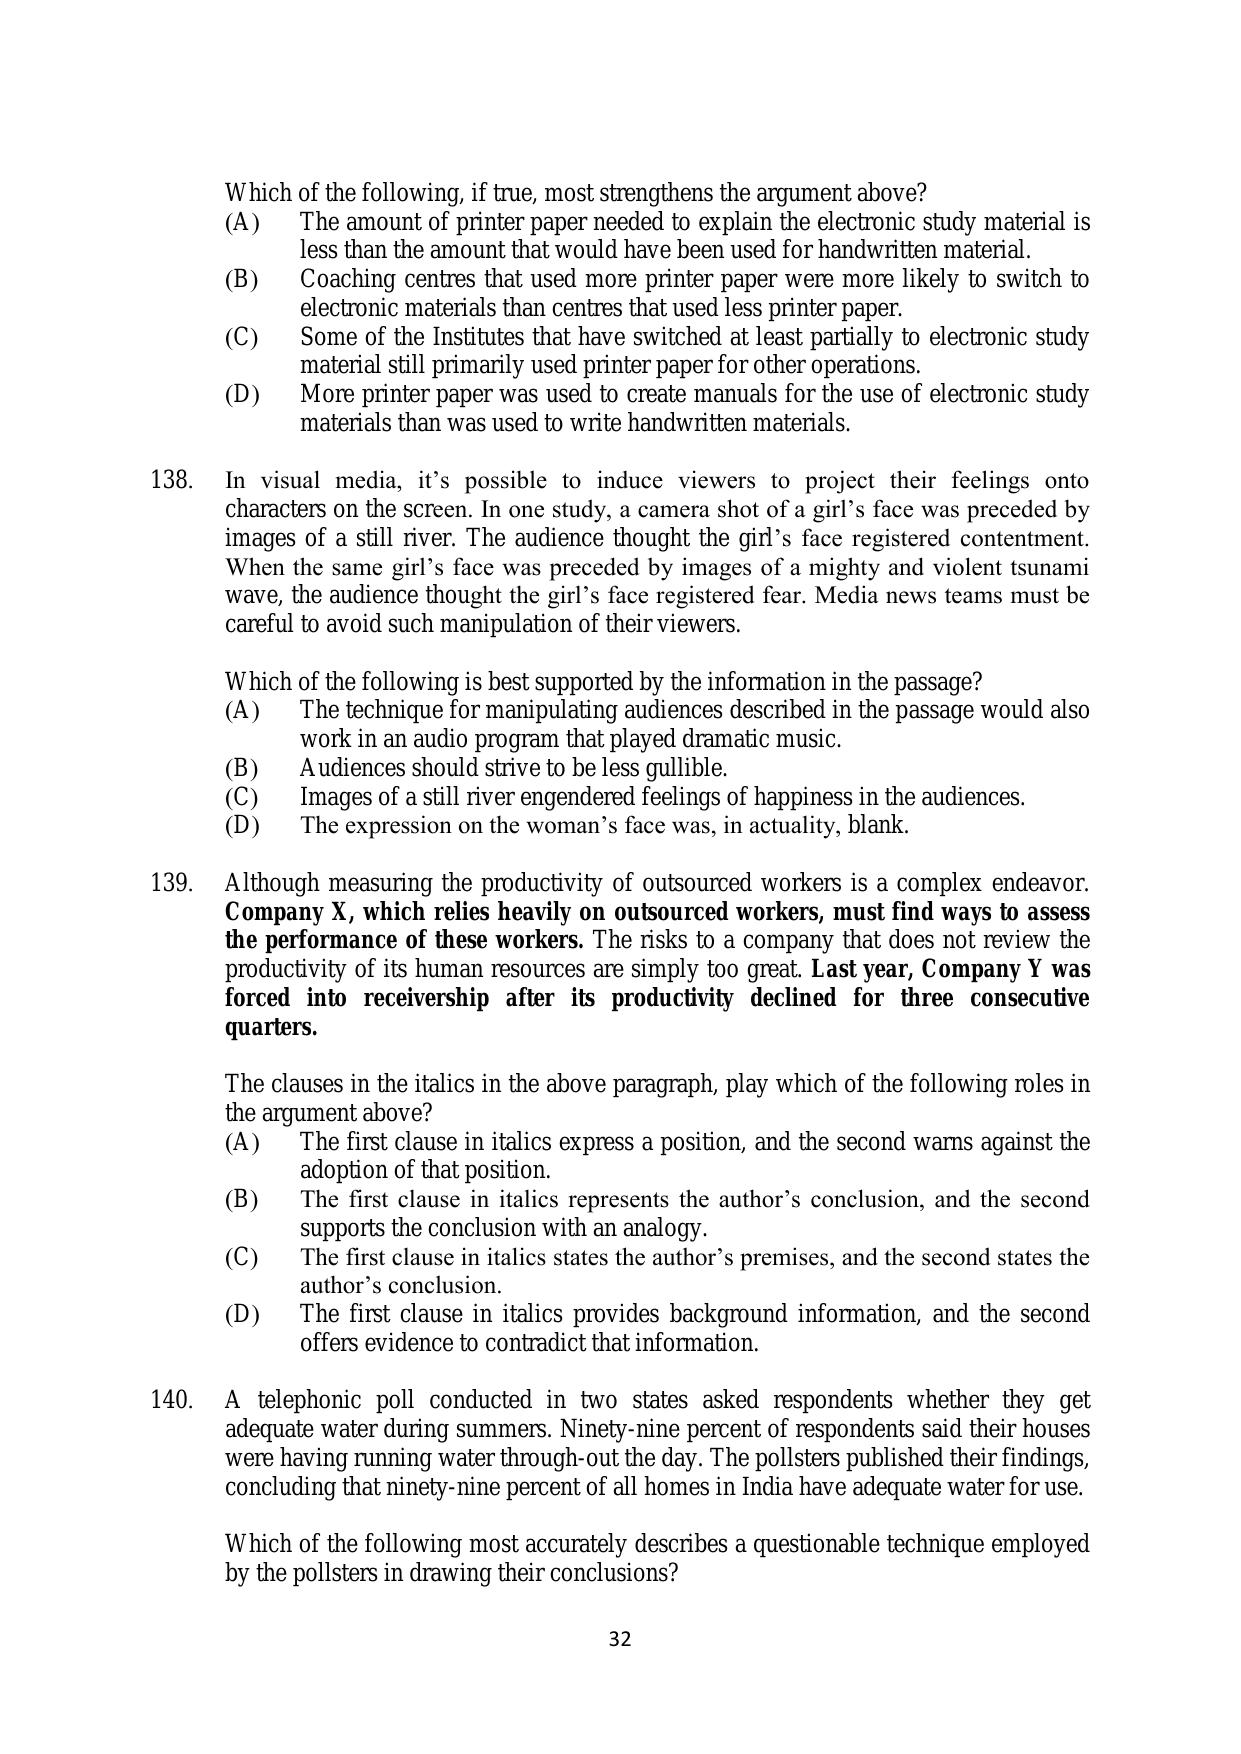 AILET 2020 Question Paper for BA LLB - Page 32